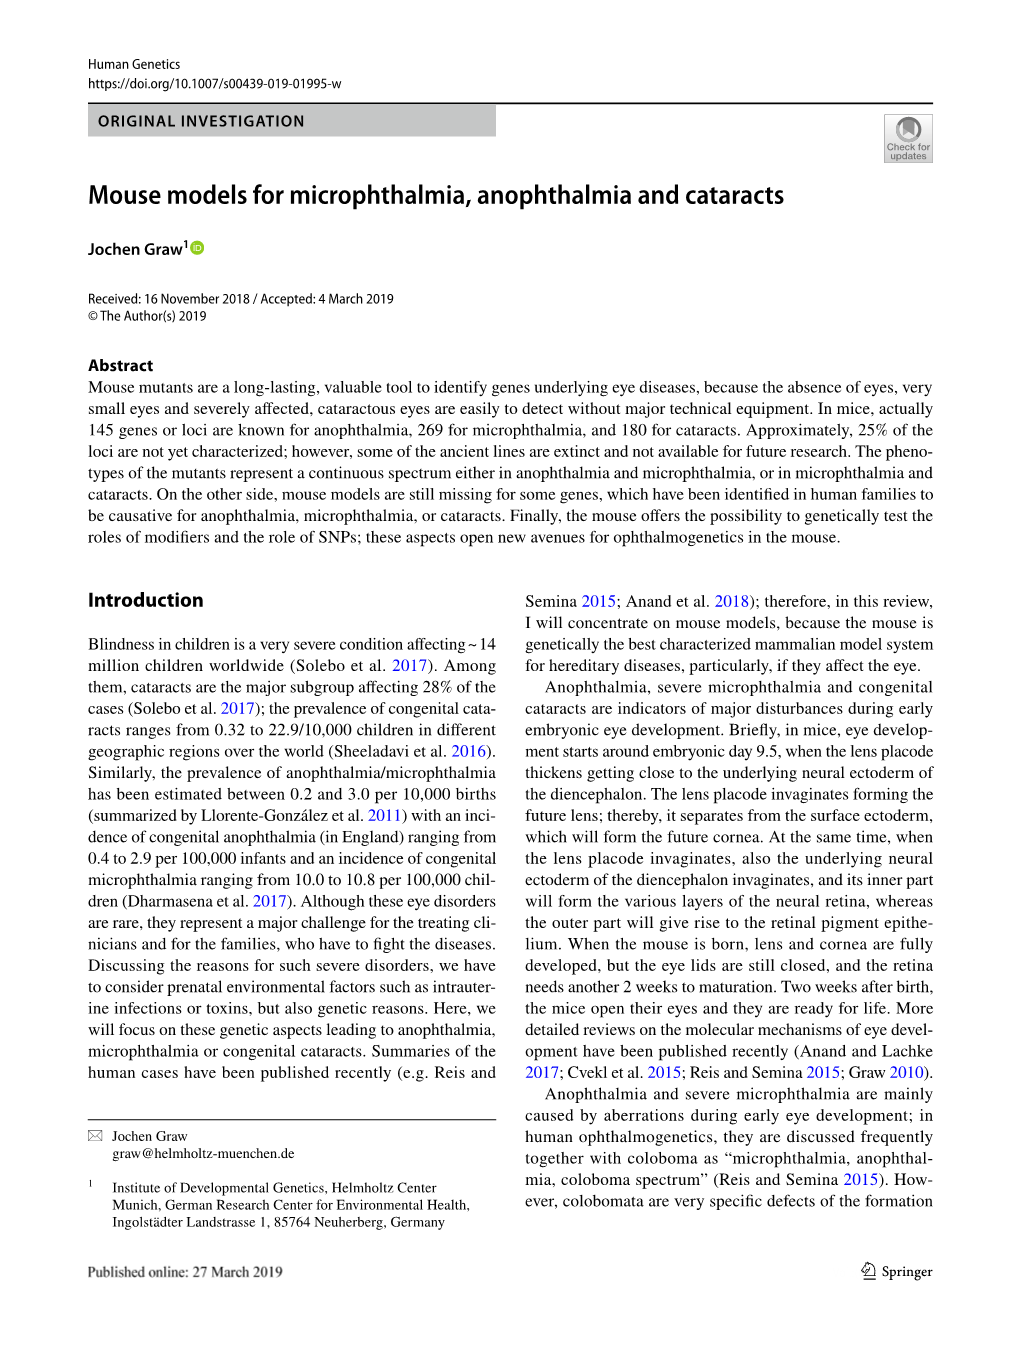 Mouse Models for Microphthalmia, Anophthalmia and Cataracts